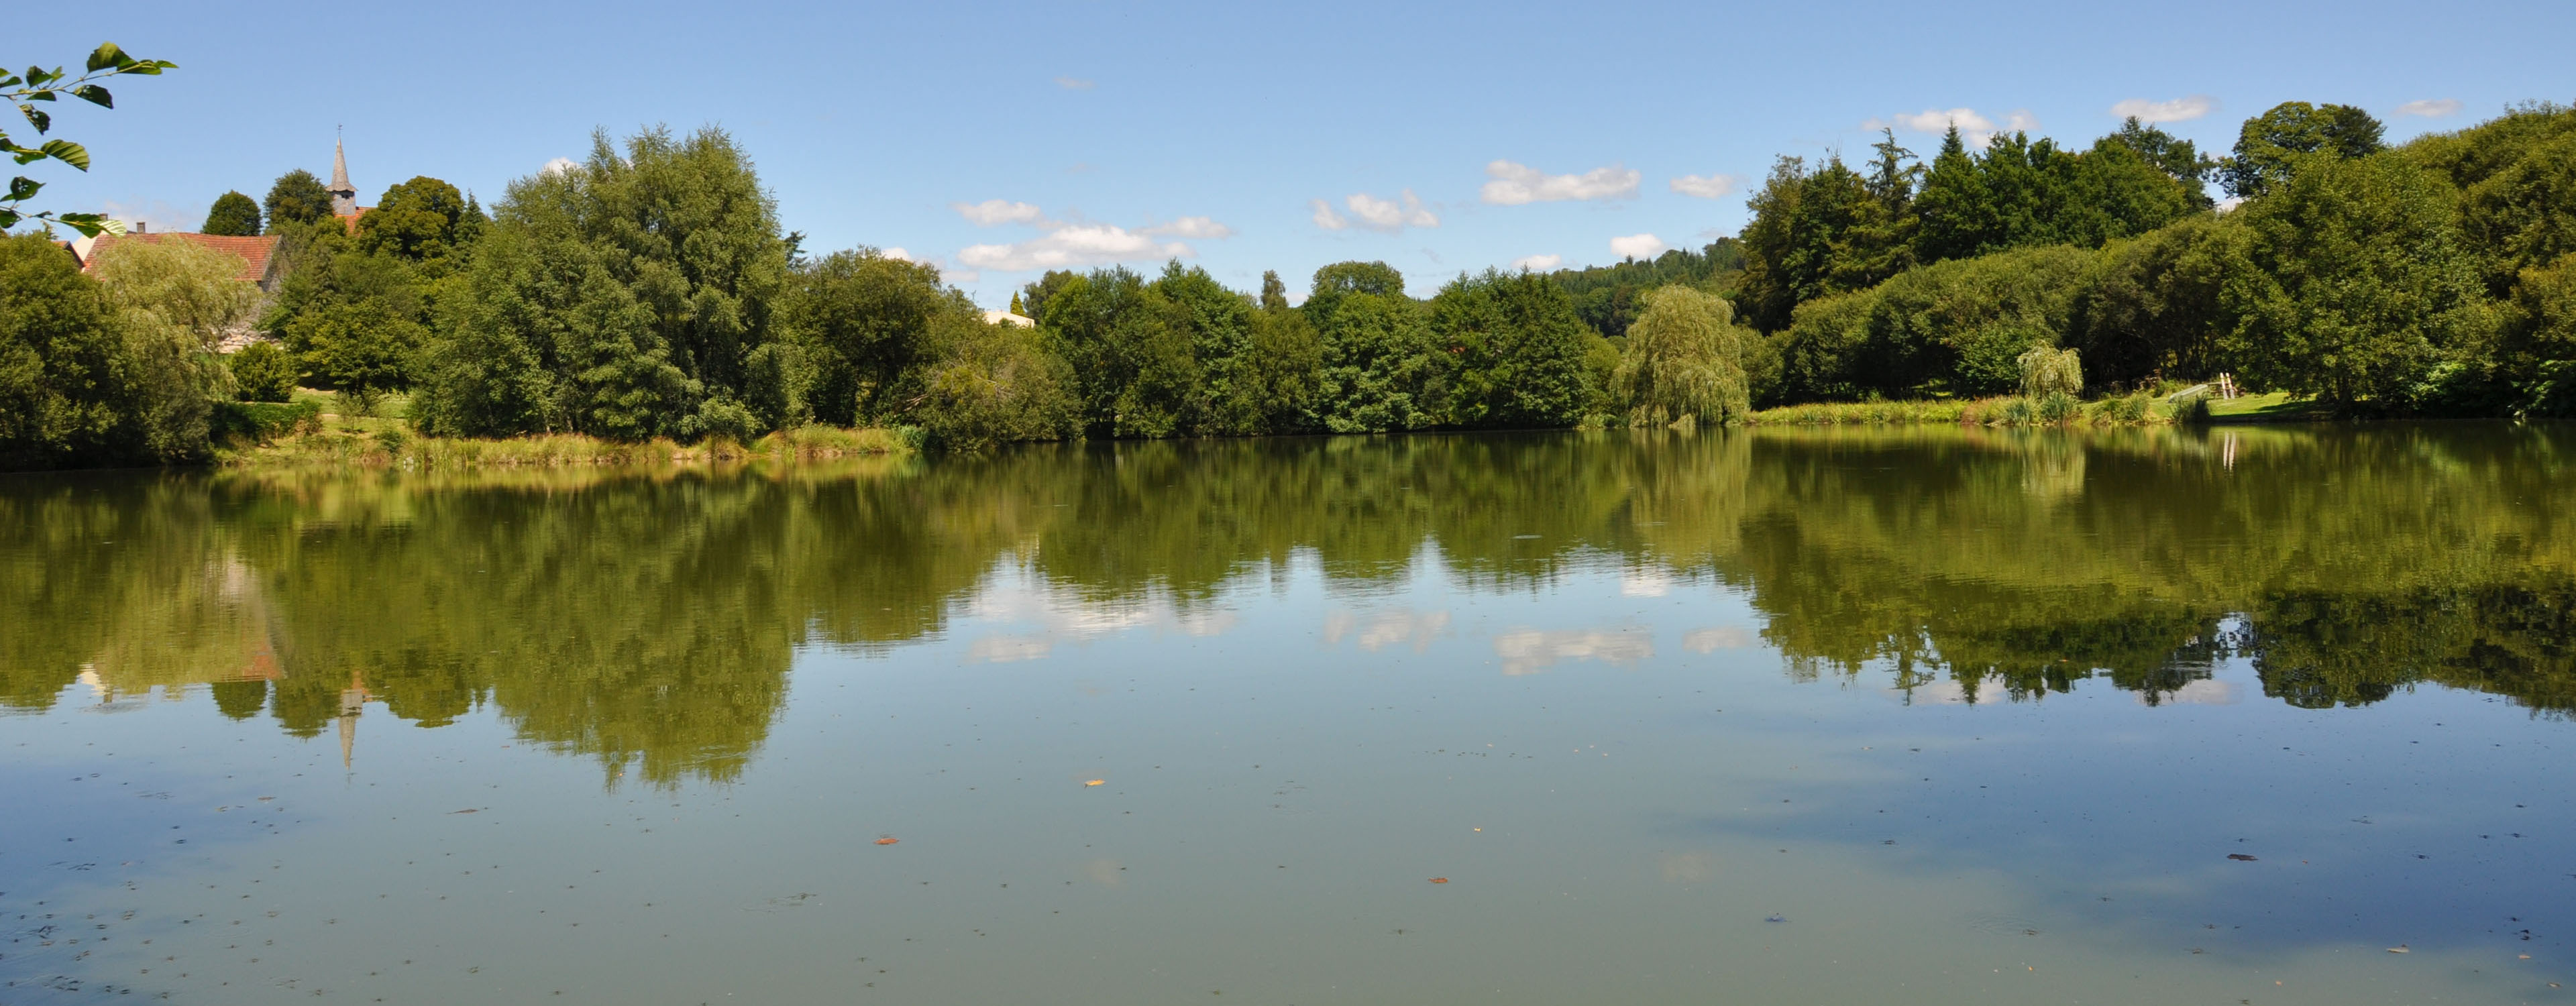 Photo gallery images of carp and fishing lake in France, Etang de Azat-Chatenet